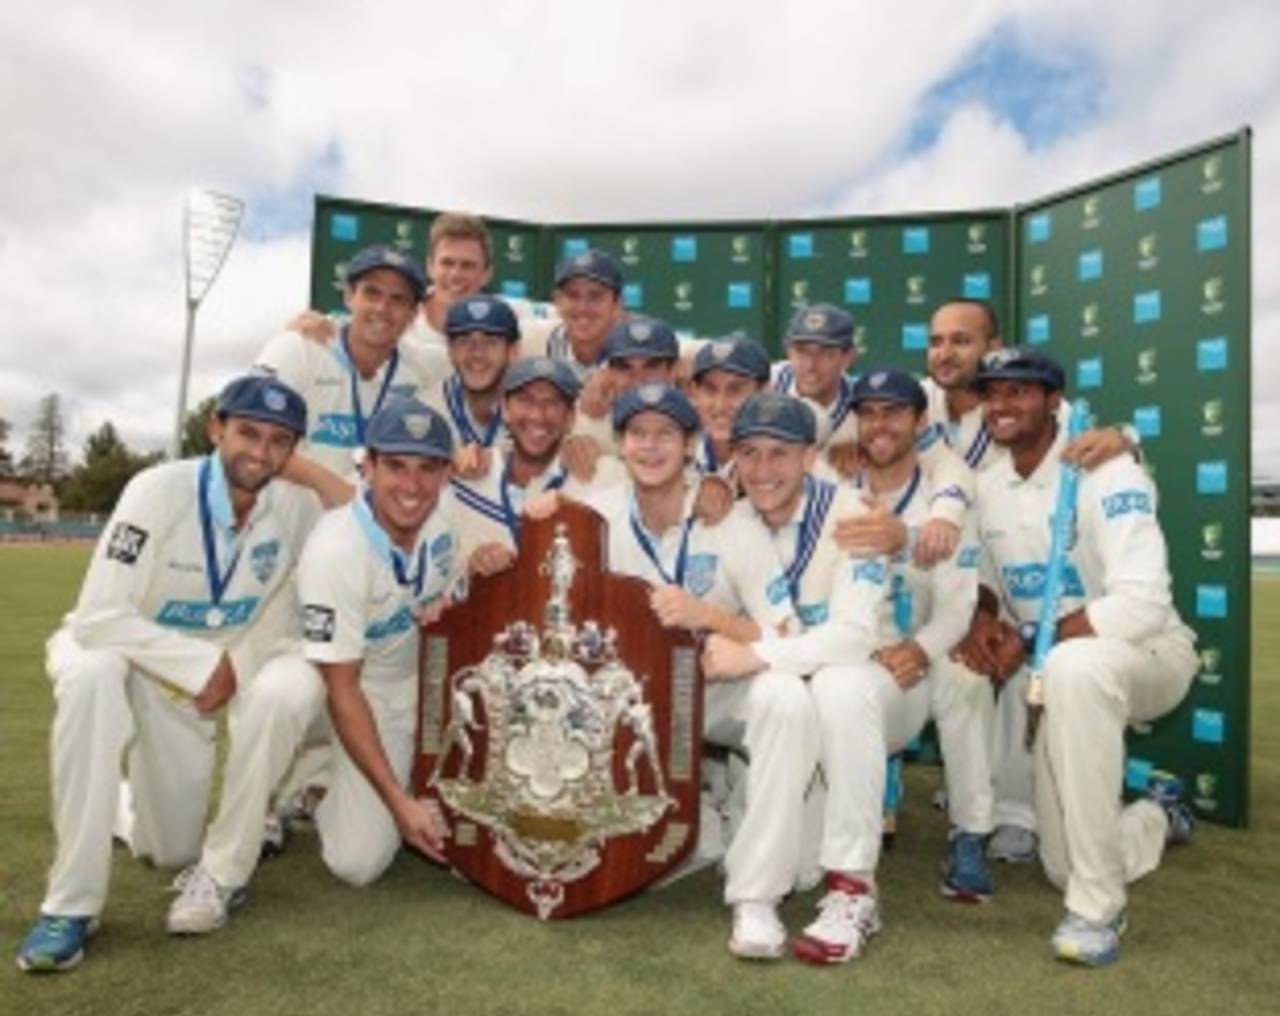 New South Wales celebrate their victory, NSW v Western Australia, Sheffield Shield final, day 5, Canberra, March 25, 2012